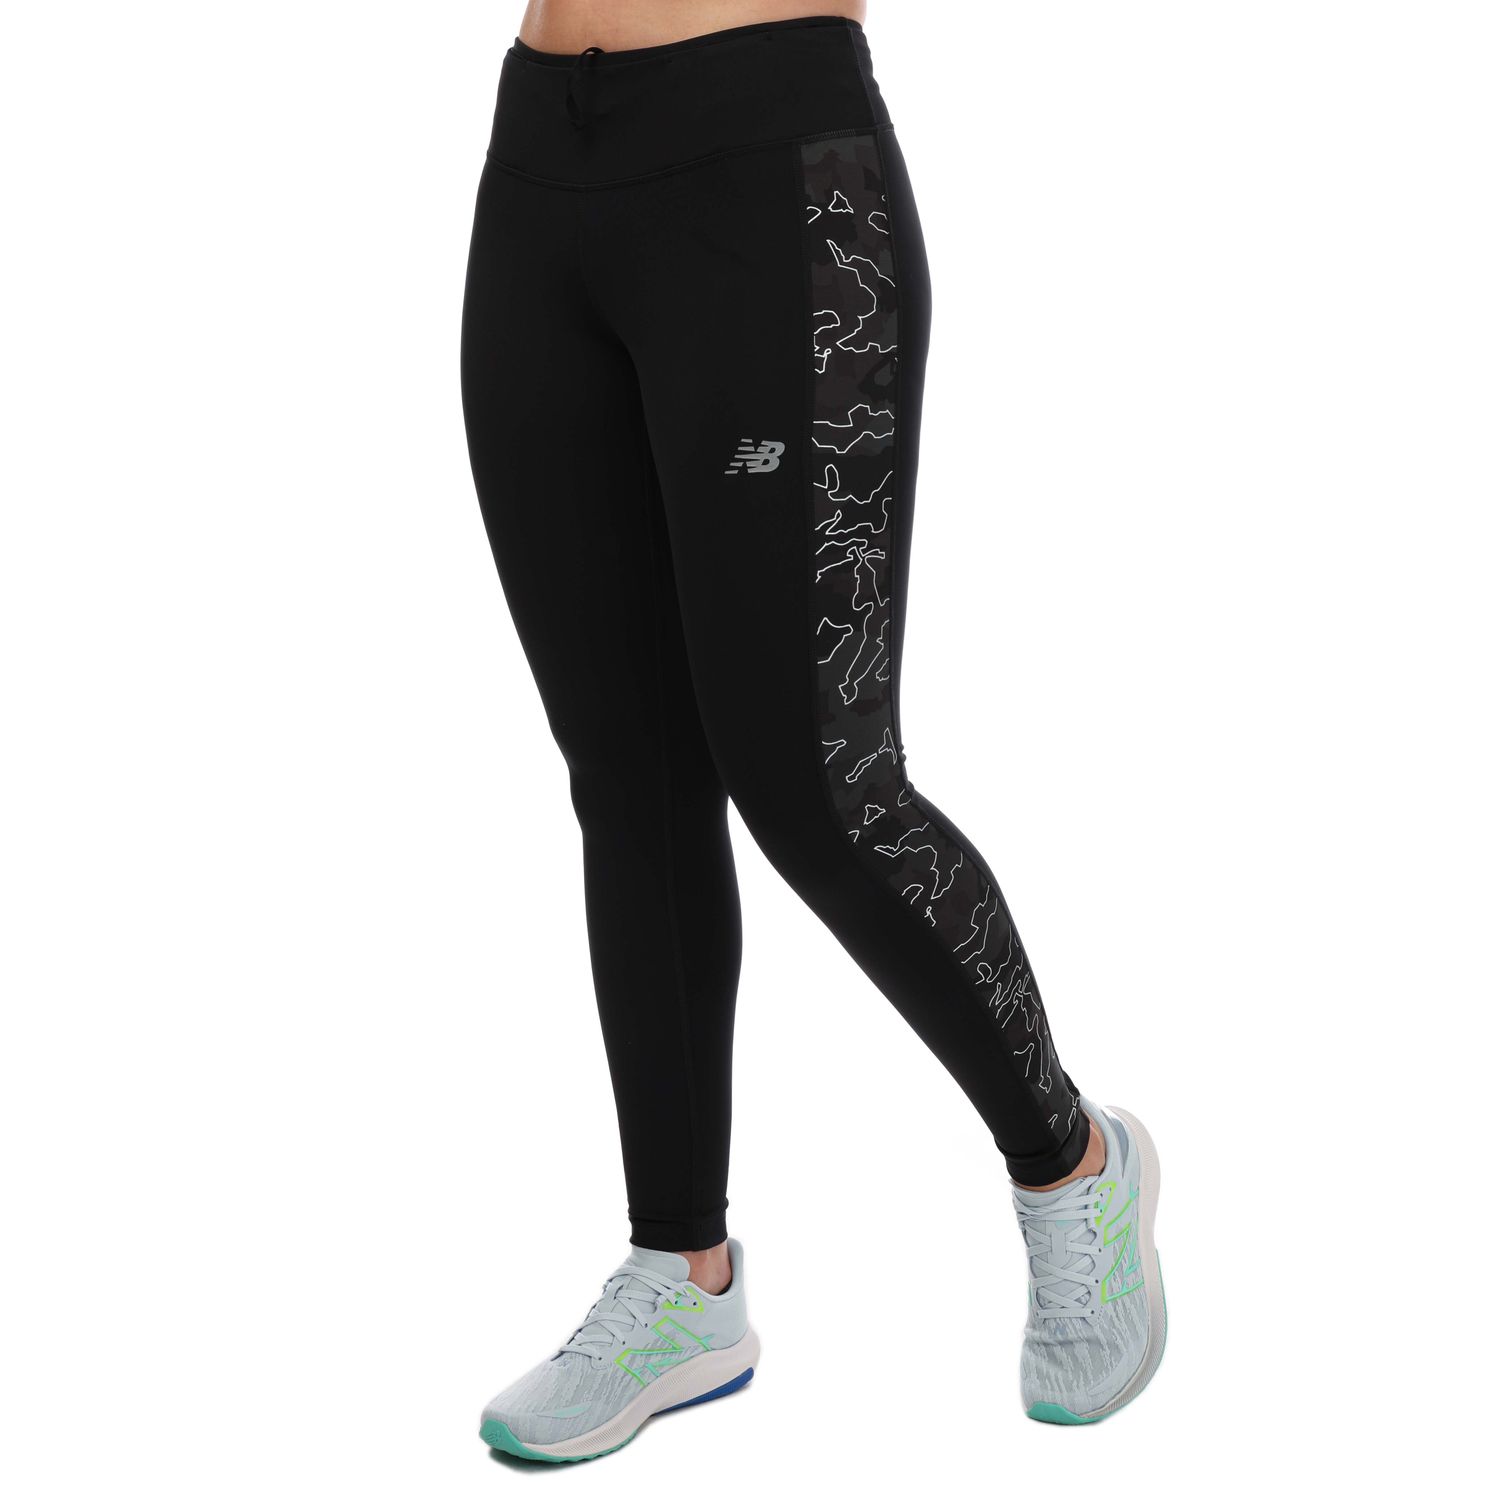 Charcoal New Balance Womens Reflective Print Accelerate Tights